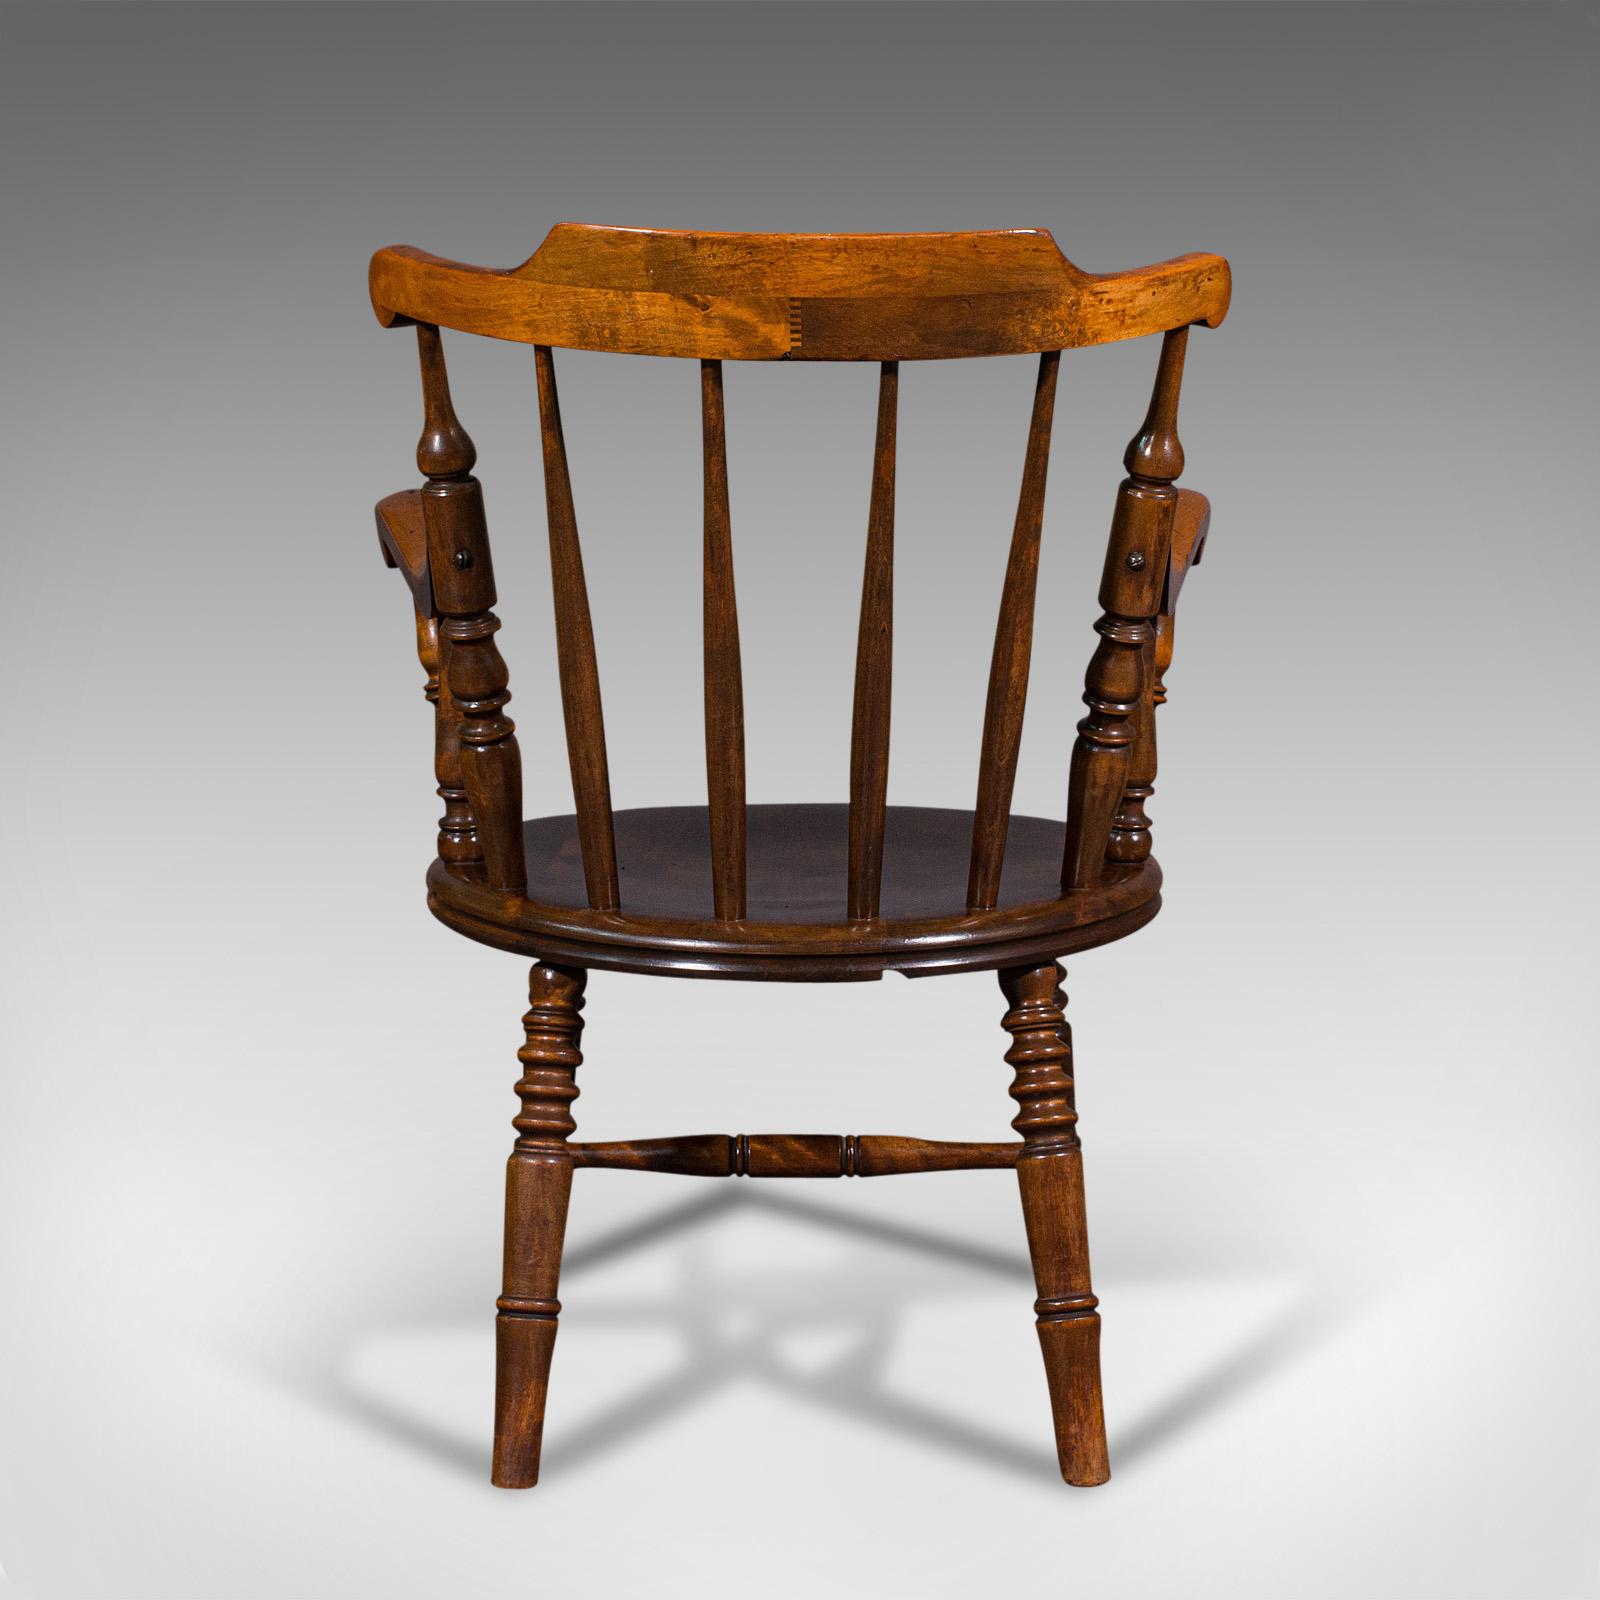 Antique Fireside Elbow Chair, English, Beech, Occasional Seat, Victorian, C.1890 For Sale 1